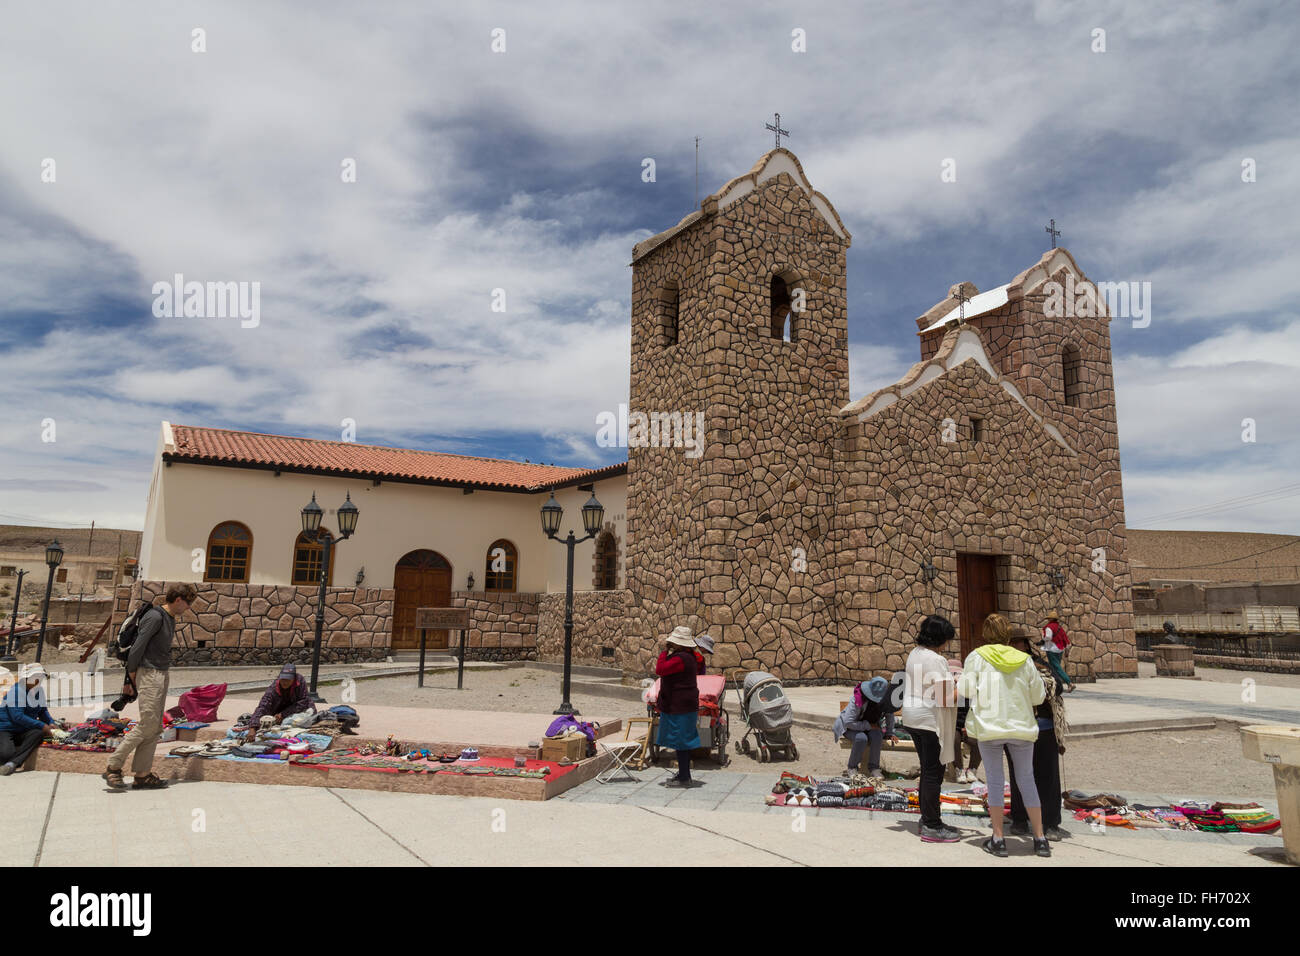 San Antonio de los Cobres, Argentina - November 14, 2015: People selling and buying handicrafts in front of the cathedral. Stock Photo